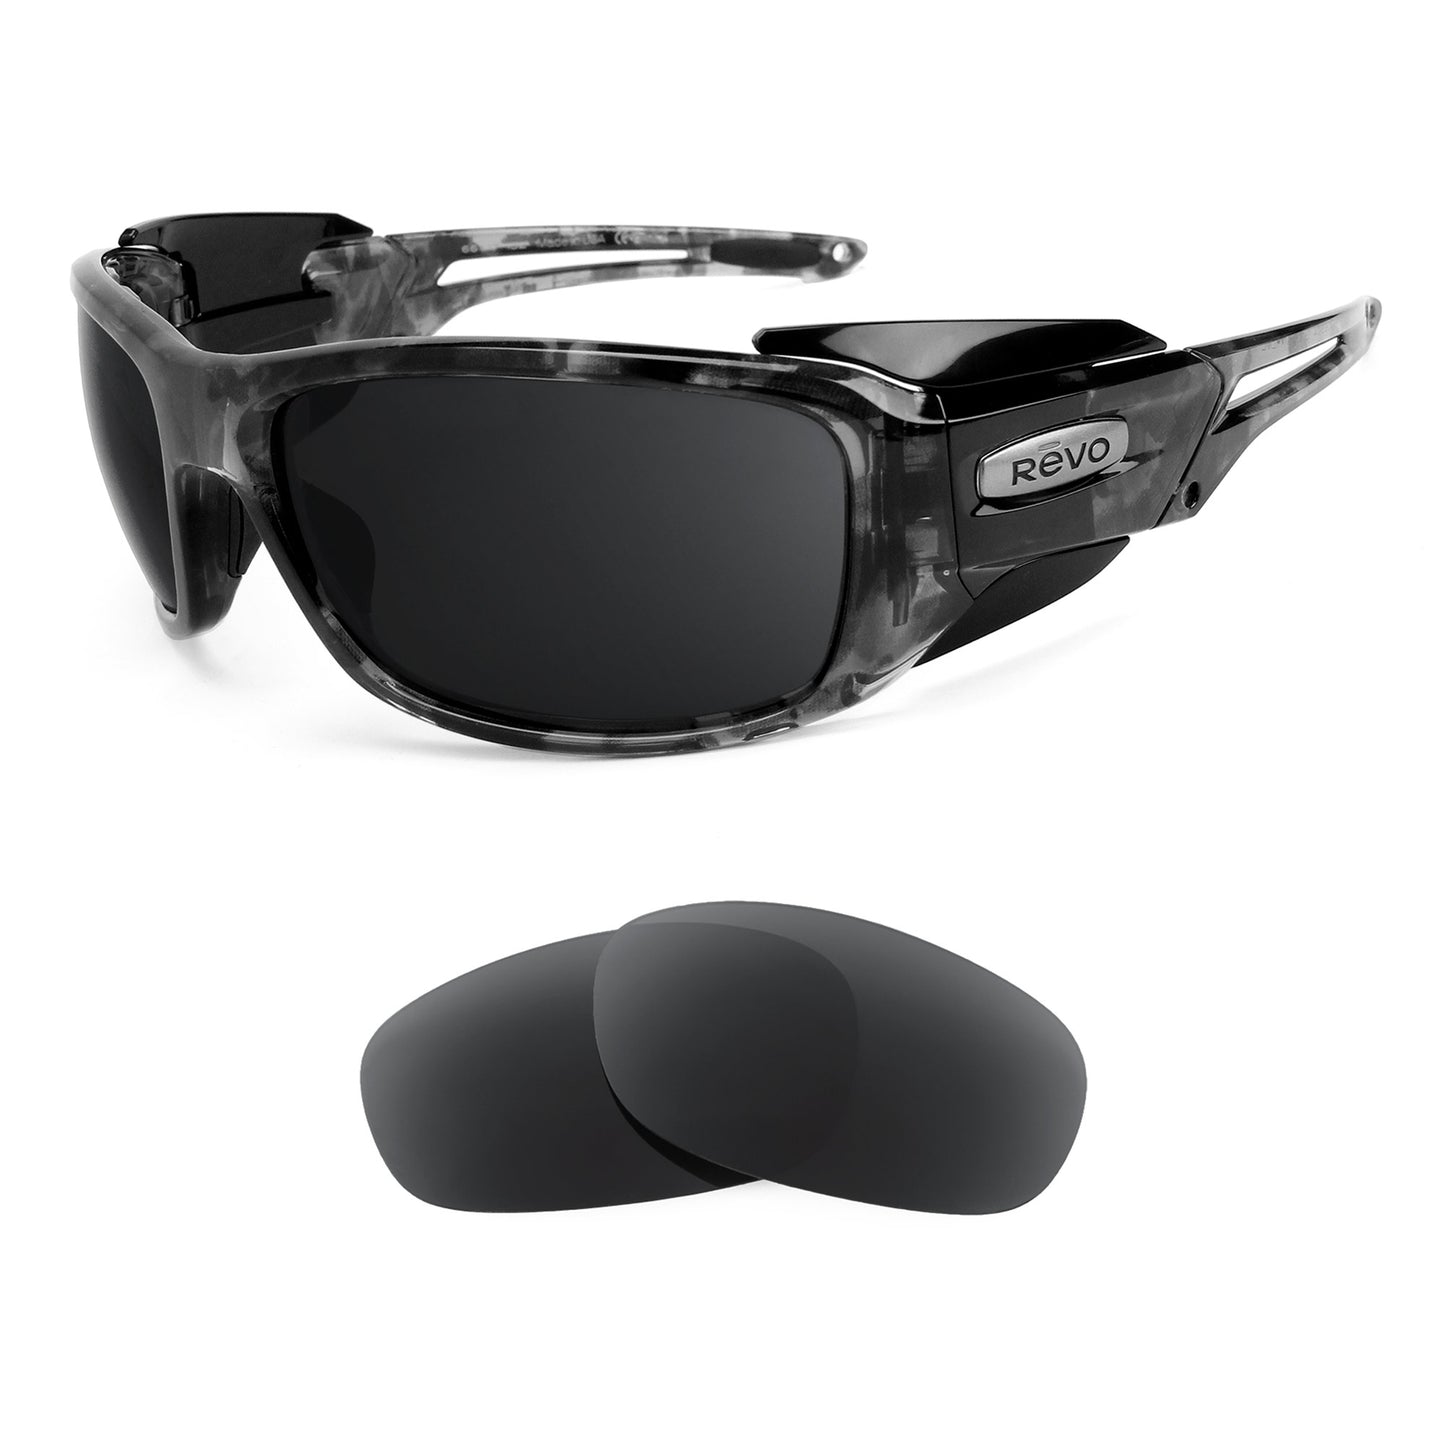 Revo Guide Extreme RE4063 sunglasses with replacement lenses